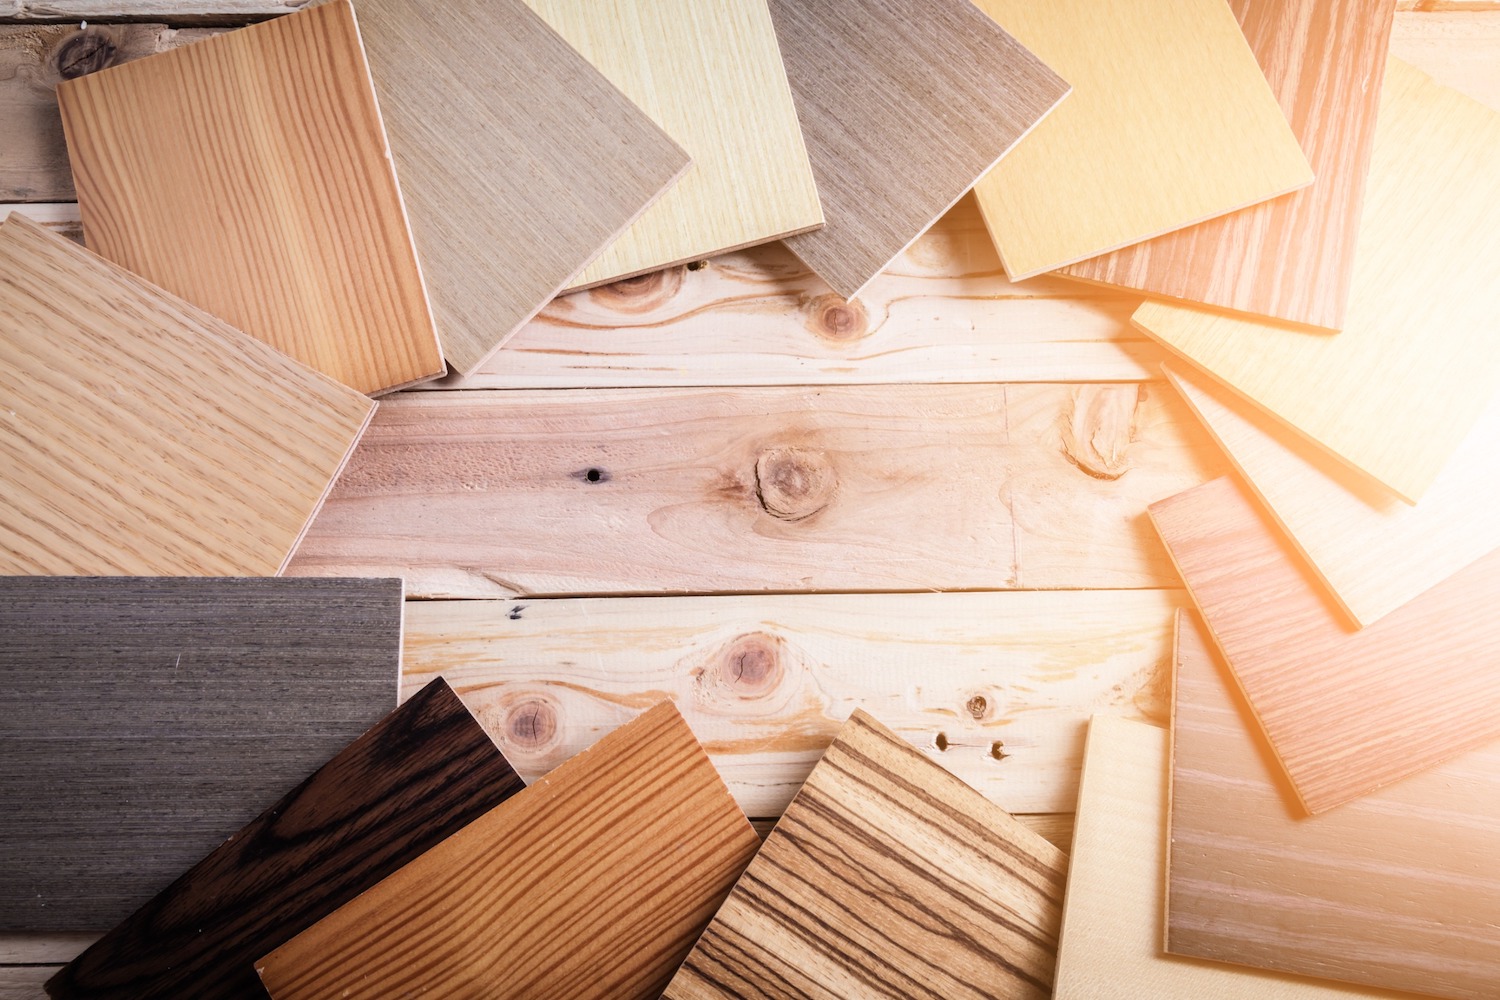 Hardwood Or Laminate: Which is the Best?